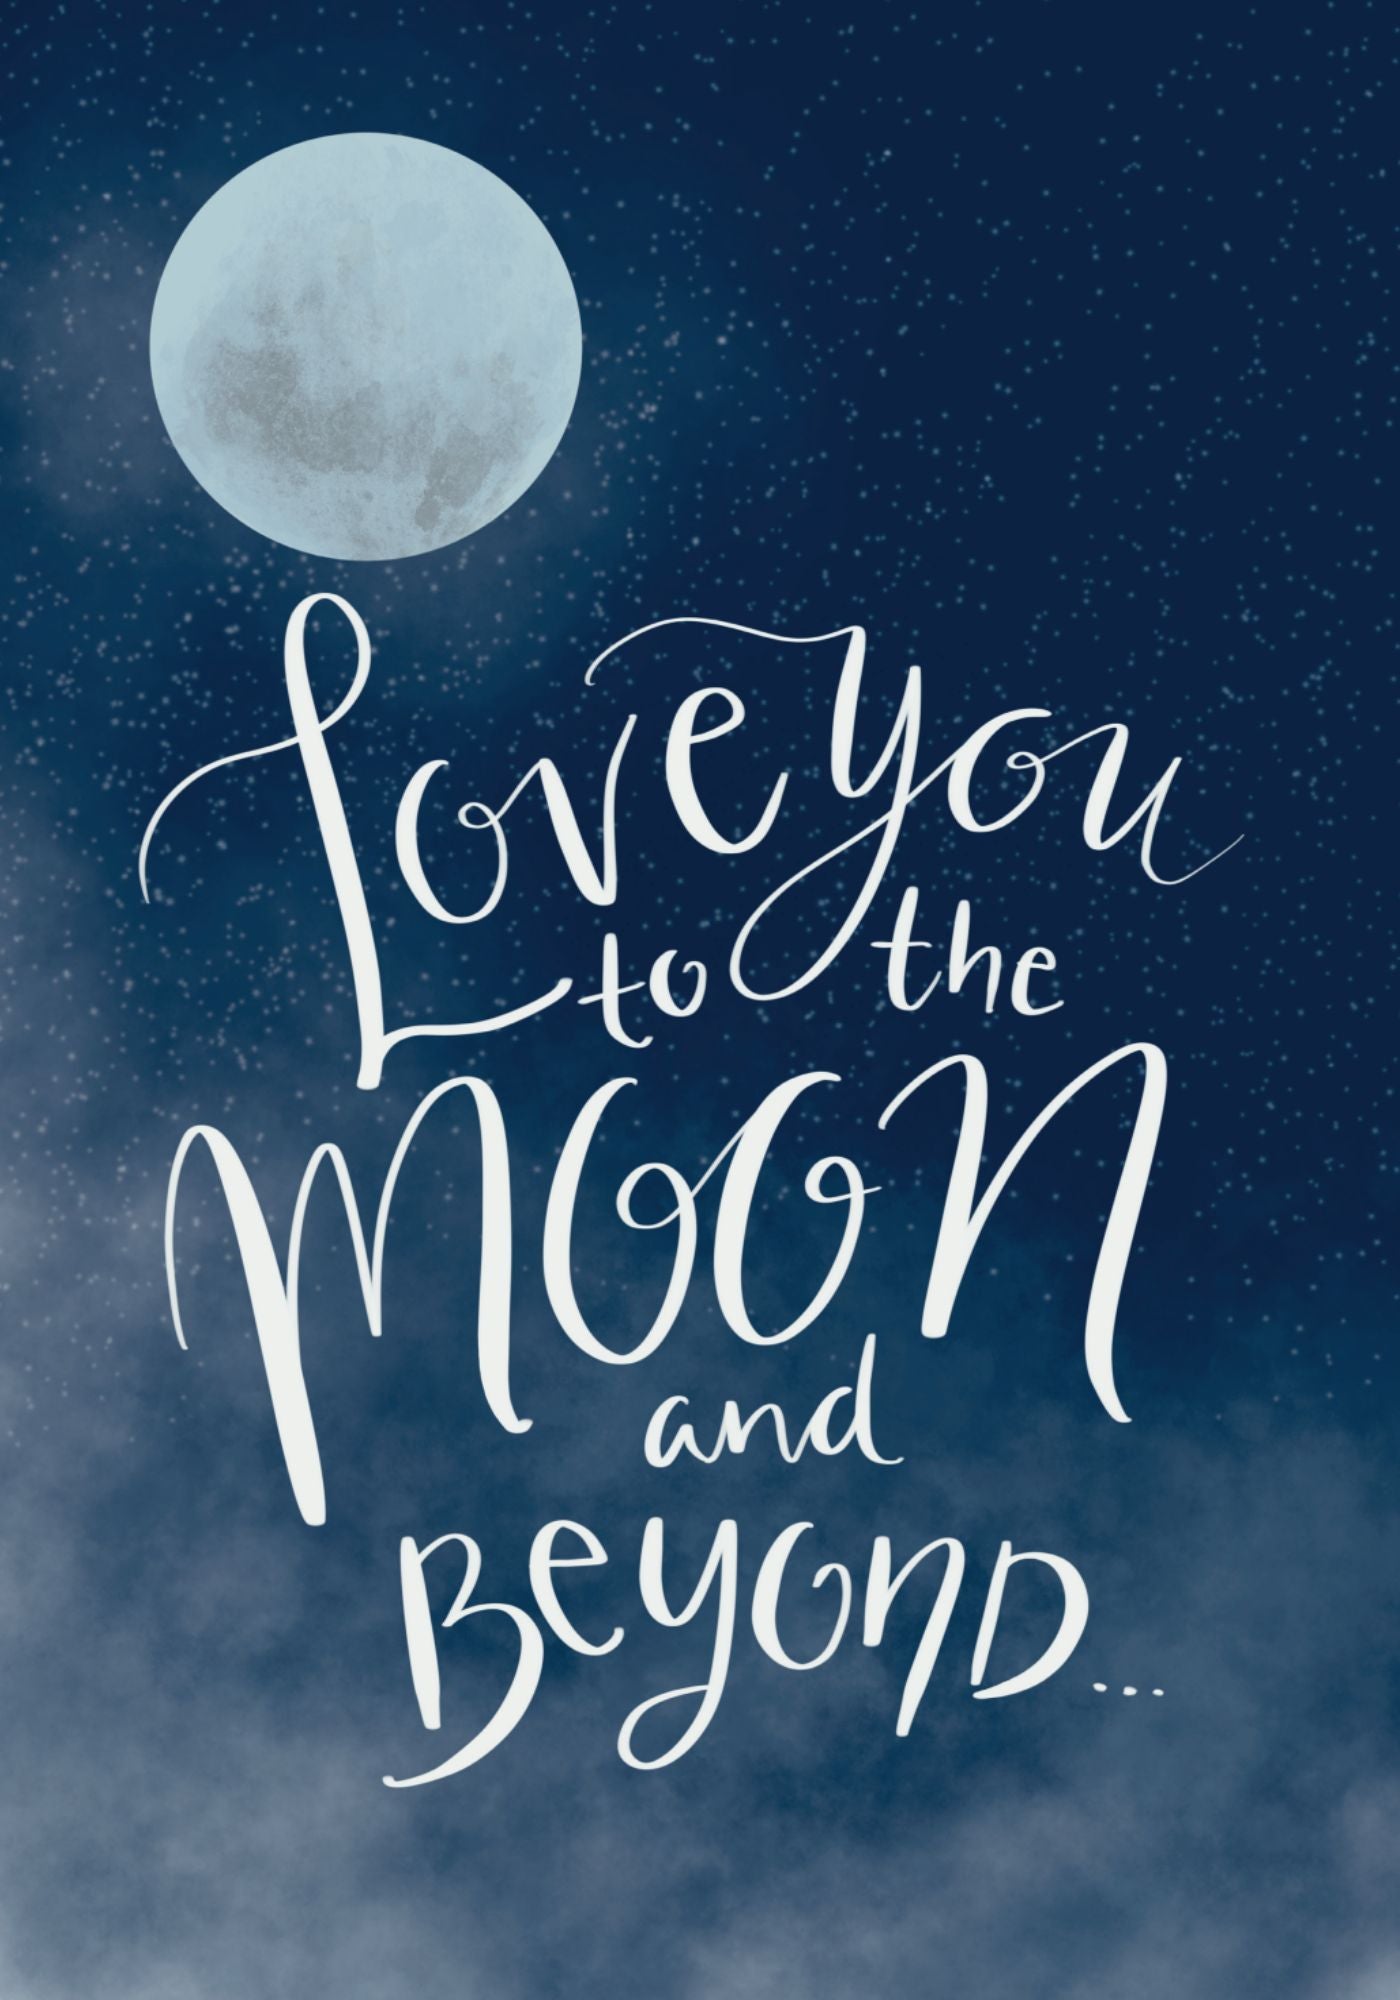 To the moon AE poster